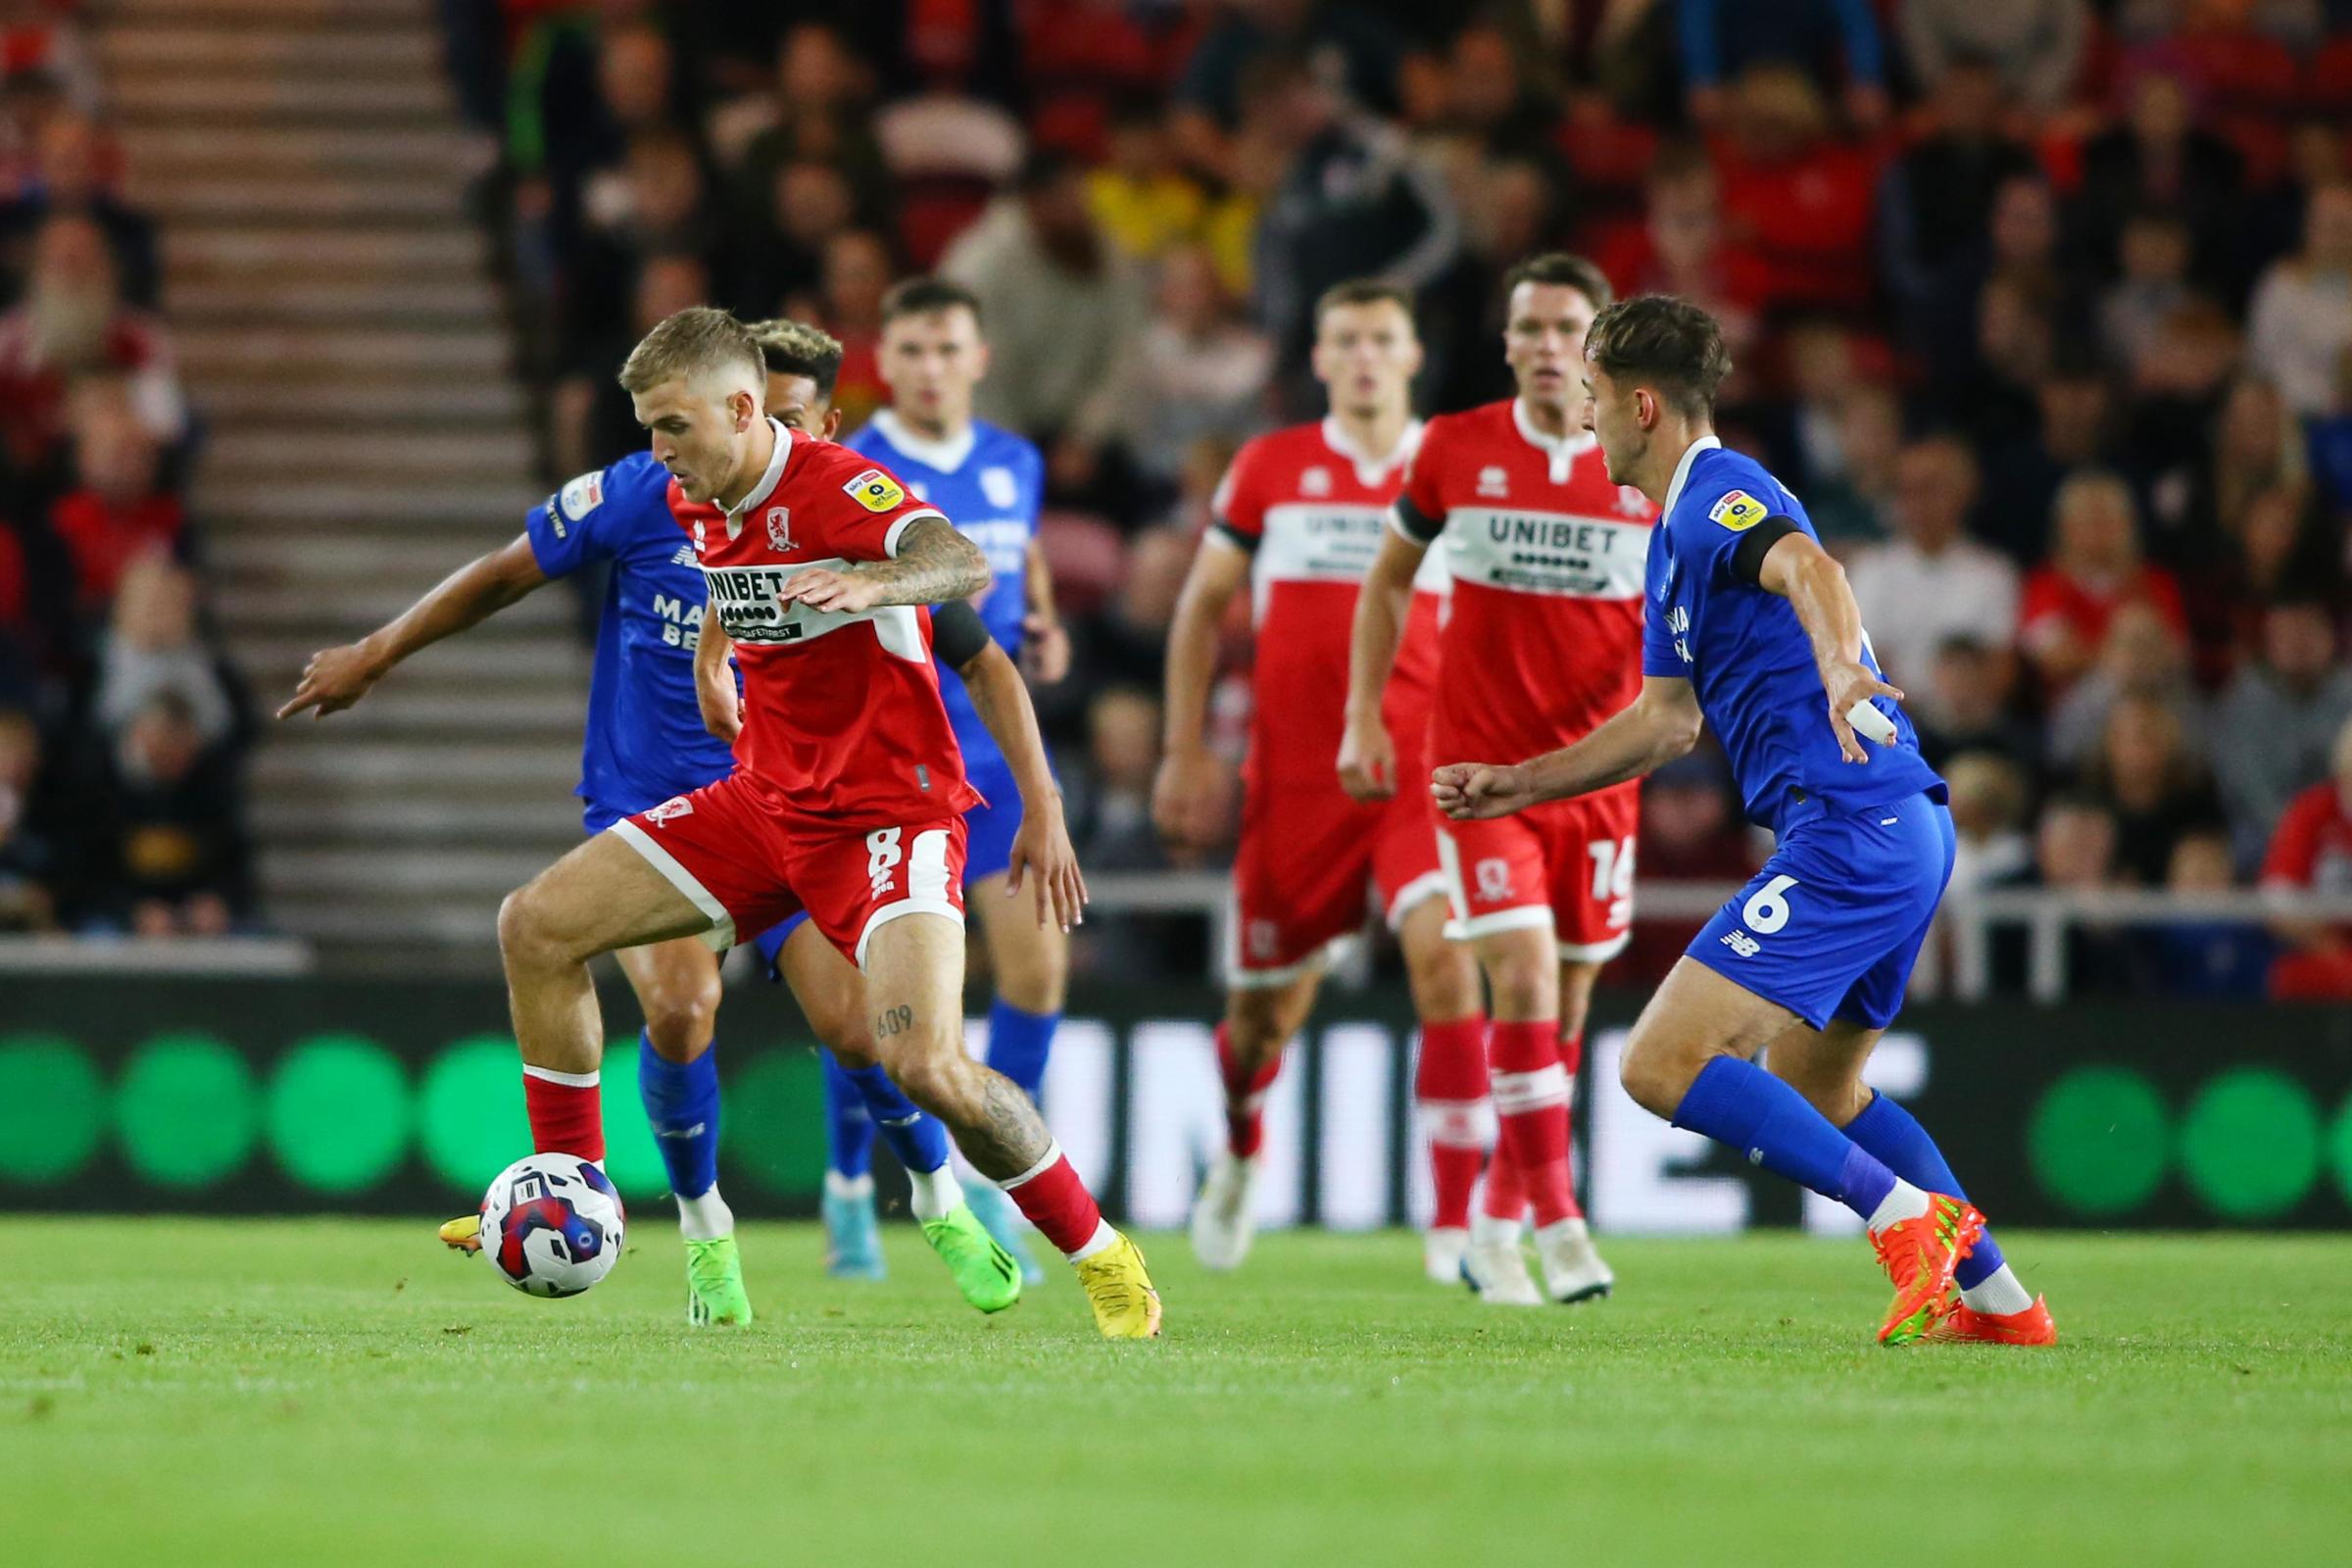 Middlesbrough 2 Cardiff City 3